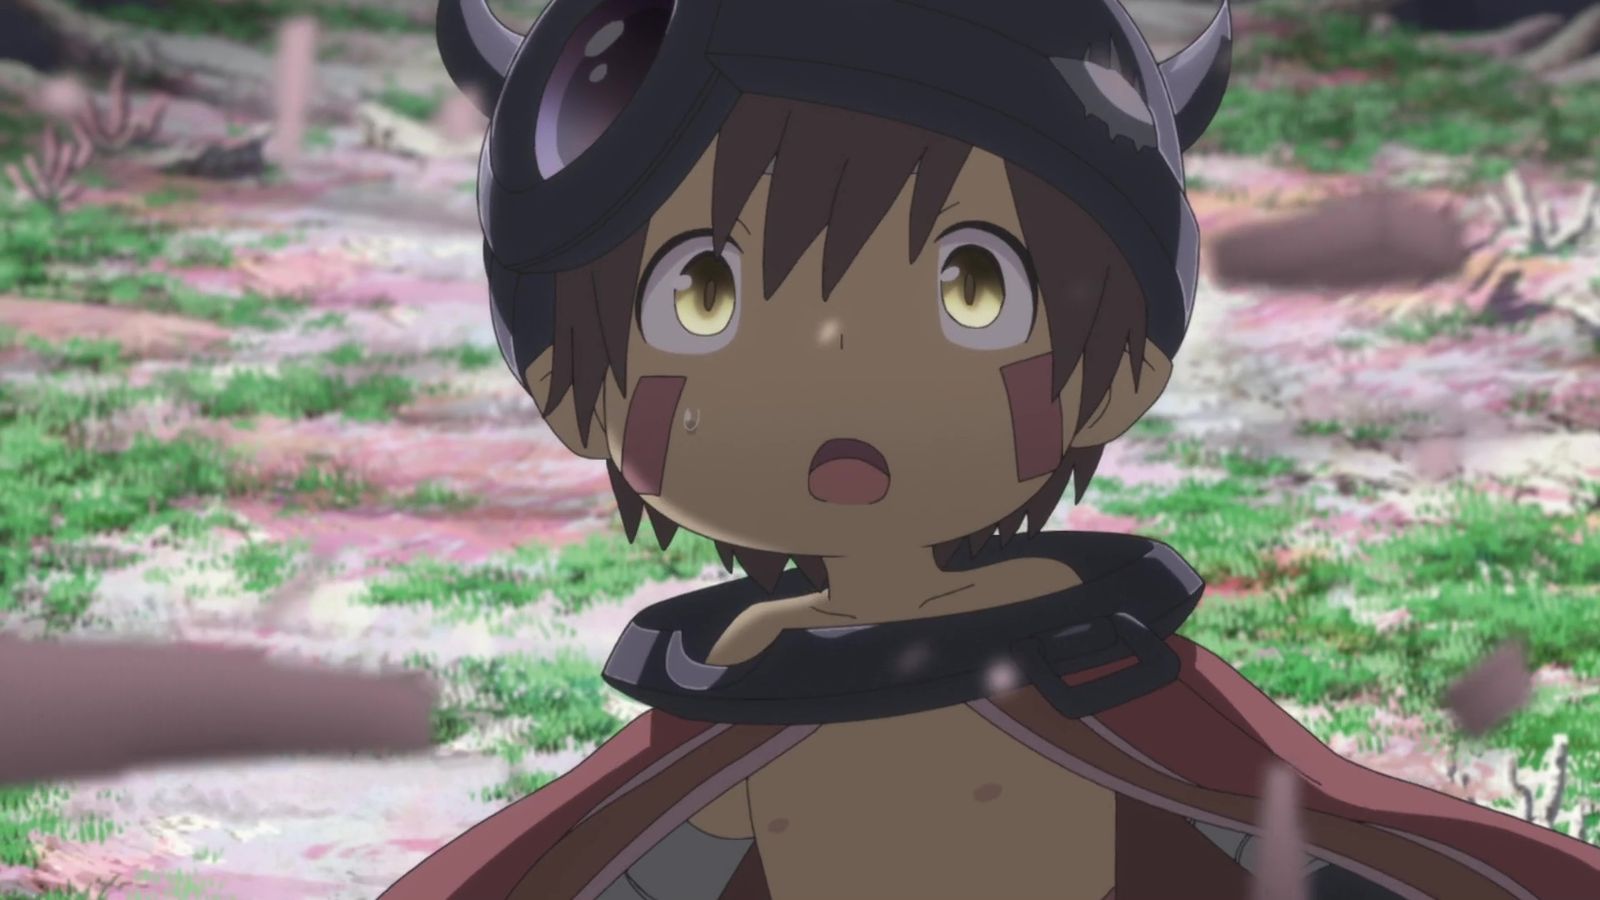 Who are Made in Abyss’ Voice Actors? Who is Reg's Voice Actor in Made in Abyss?